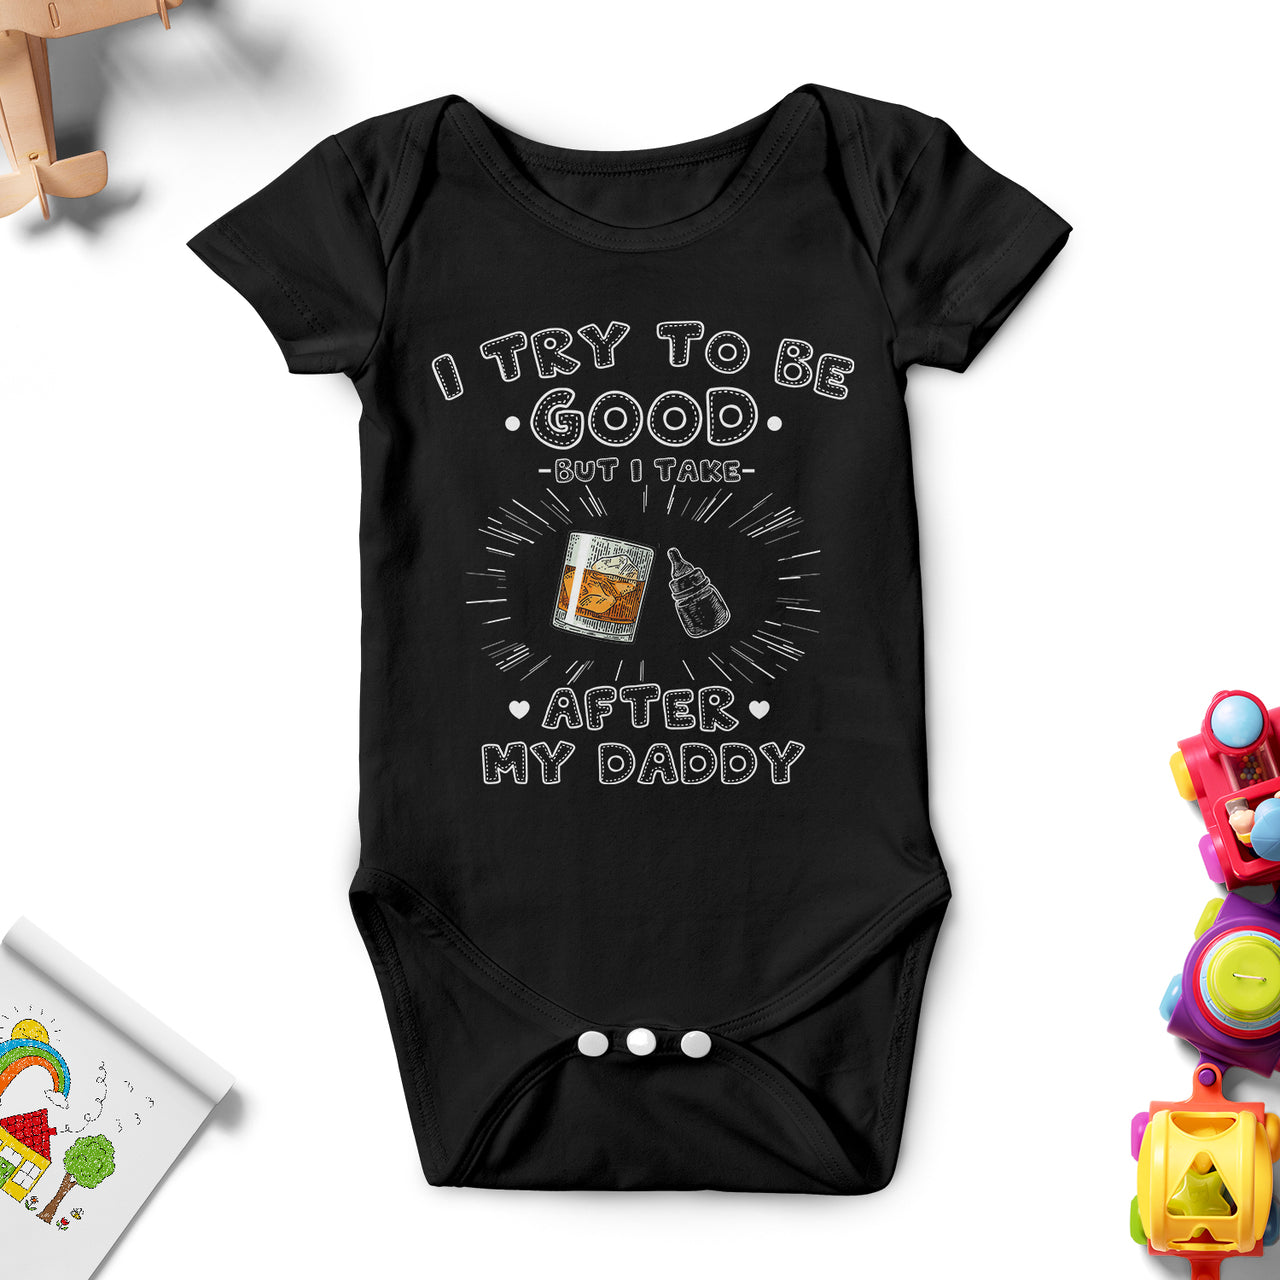 I try to be good but I take after my DADDY - Personalized Onesie Merchiz